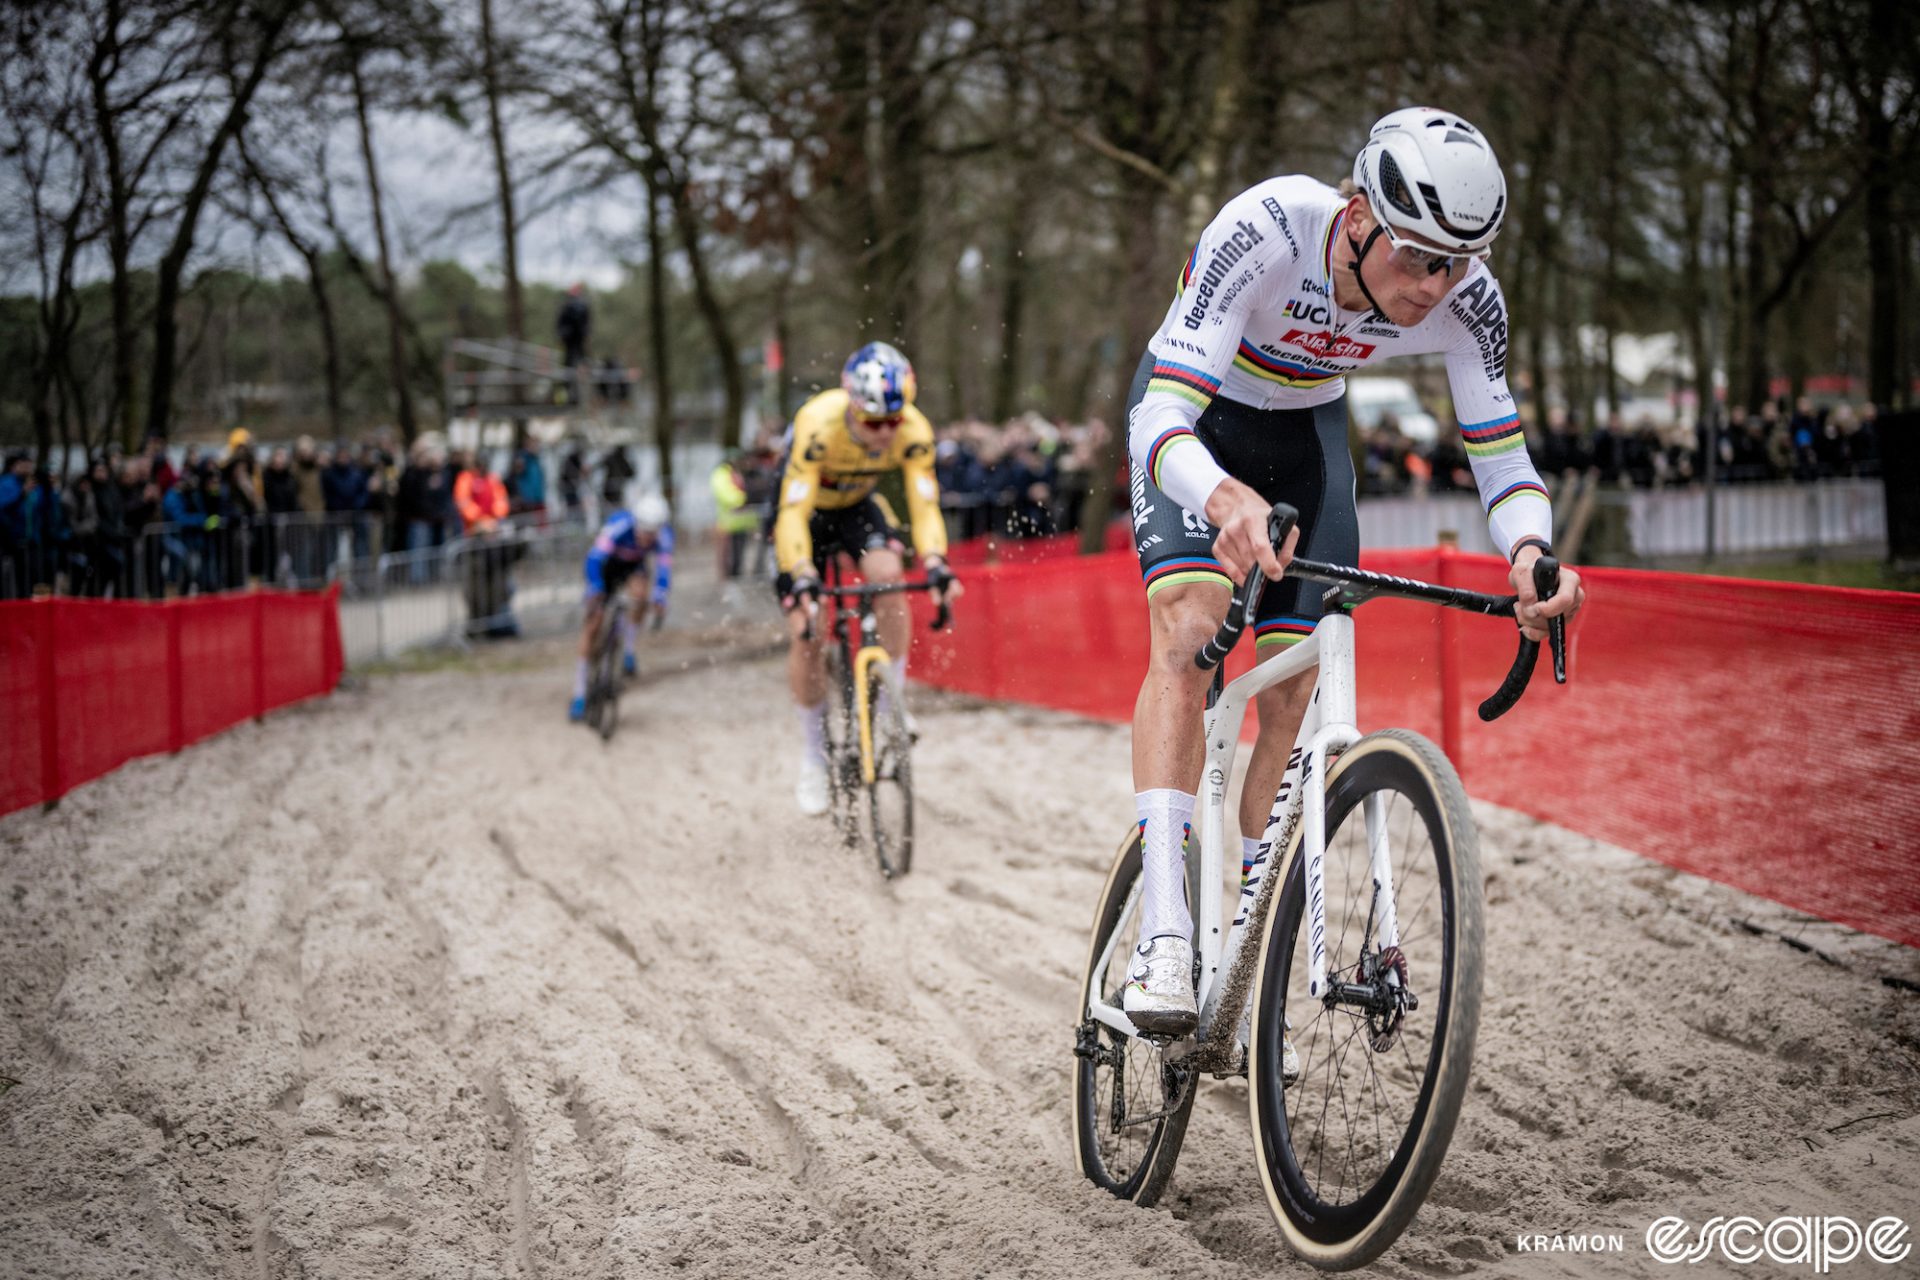 Mathieu van der Poel leads Wout van Aert in a sandy section of course. 